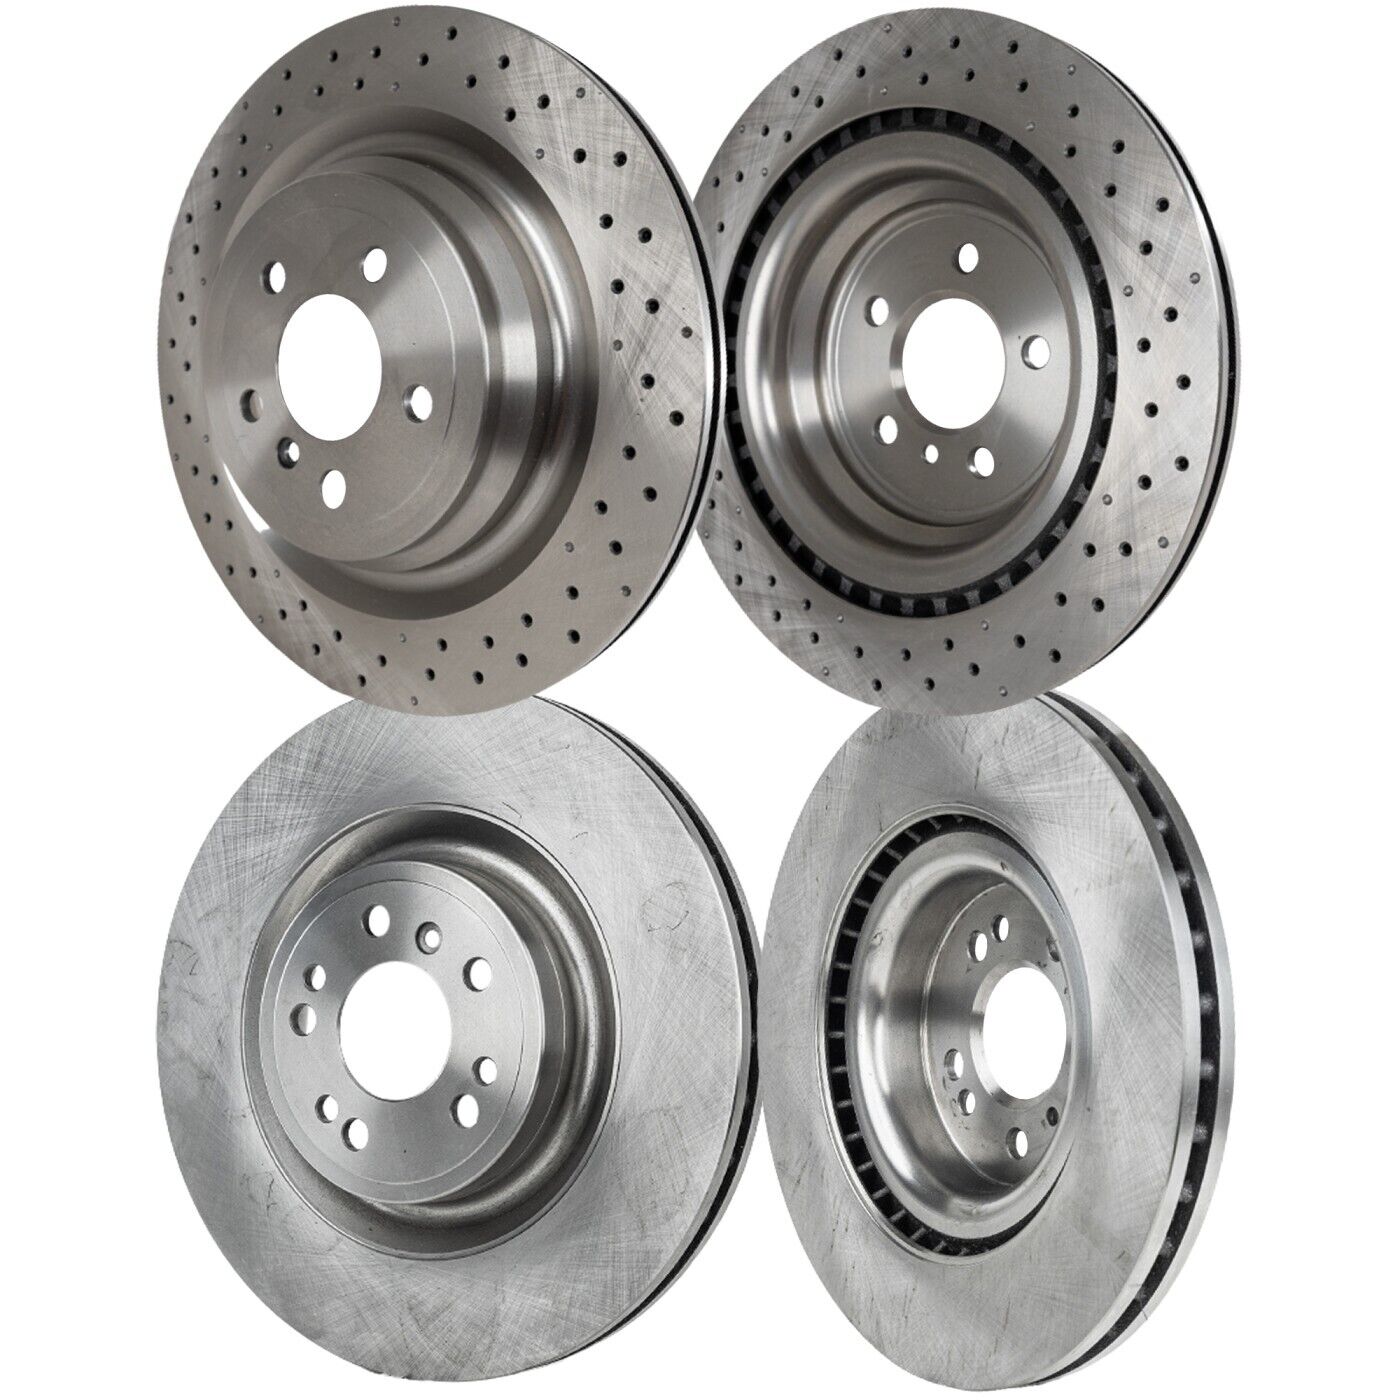 Front and Rear Disc Brake Rotors For 2017-2019 Mercedes Benz GLS450